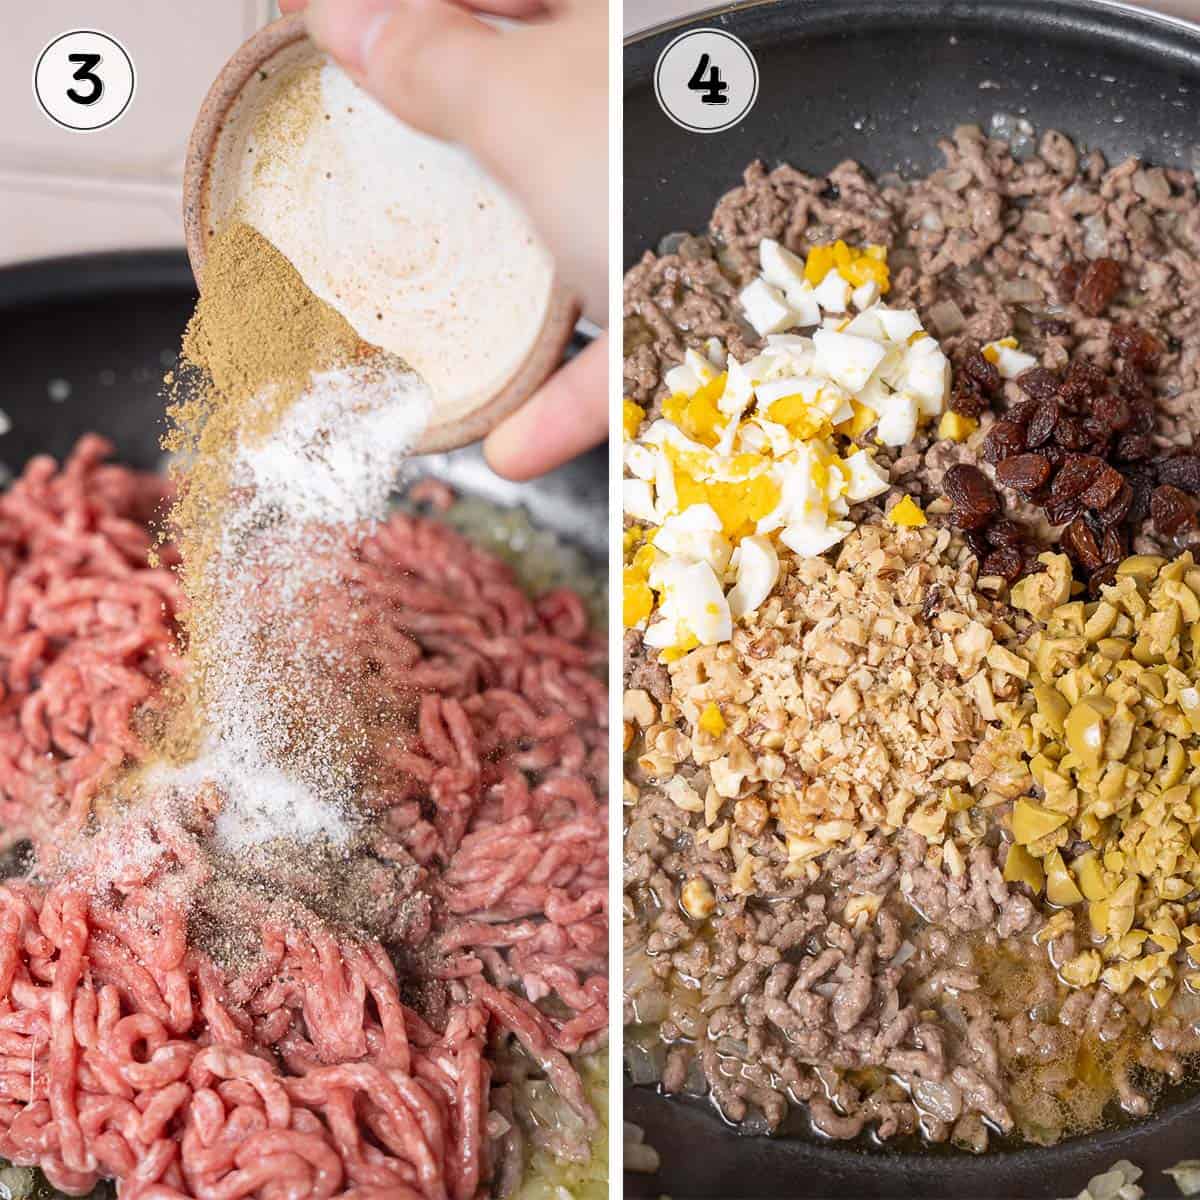 cooking the ground beef with spices and adding the other ingredients.